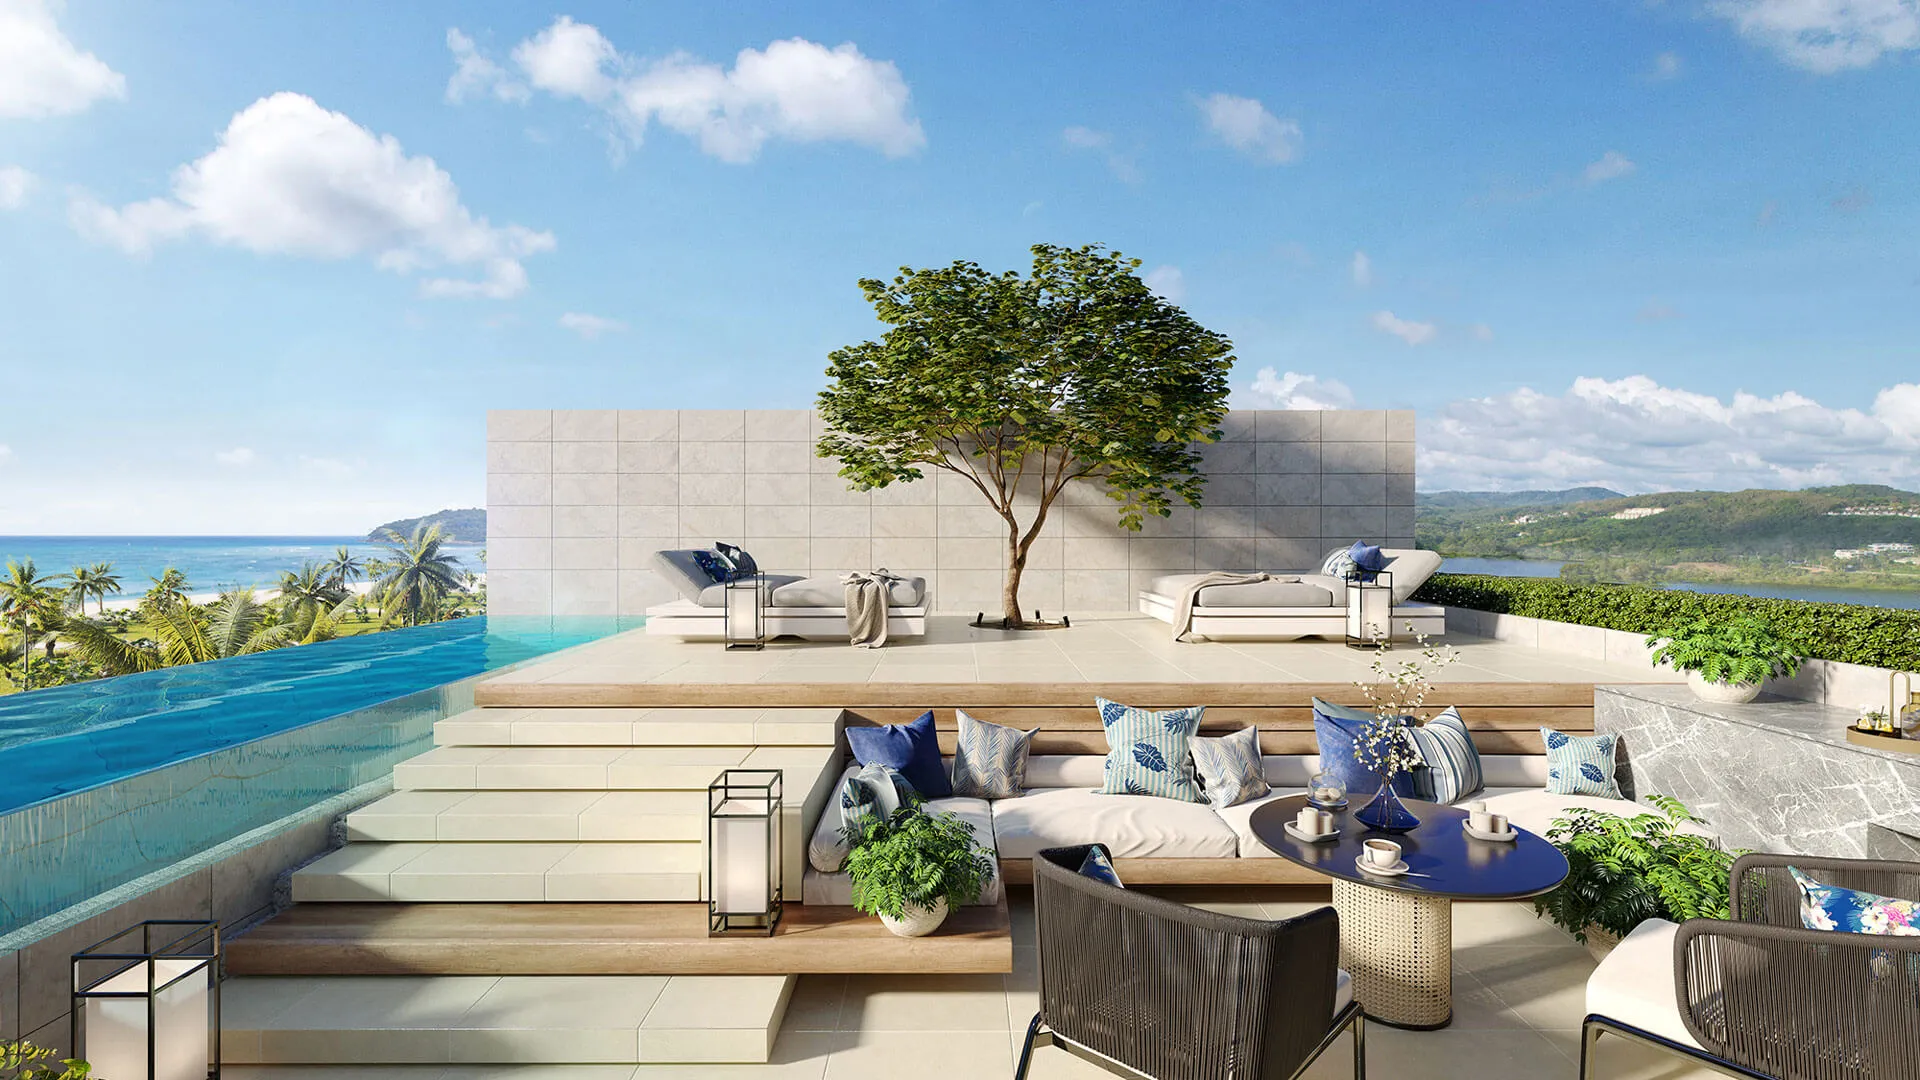 A luxurious terrace with lounge chairs, a tree, and an infinity pool overlooking a tropical beach with palm trees and hills in the distance.